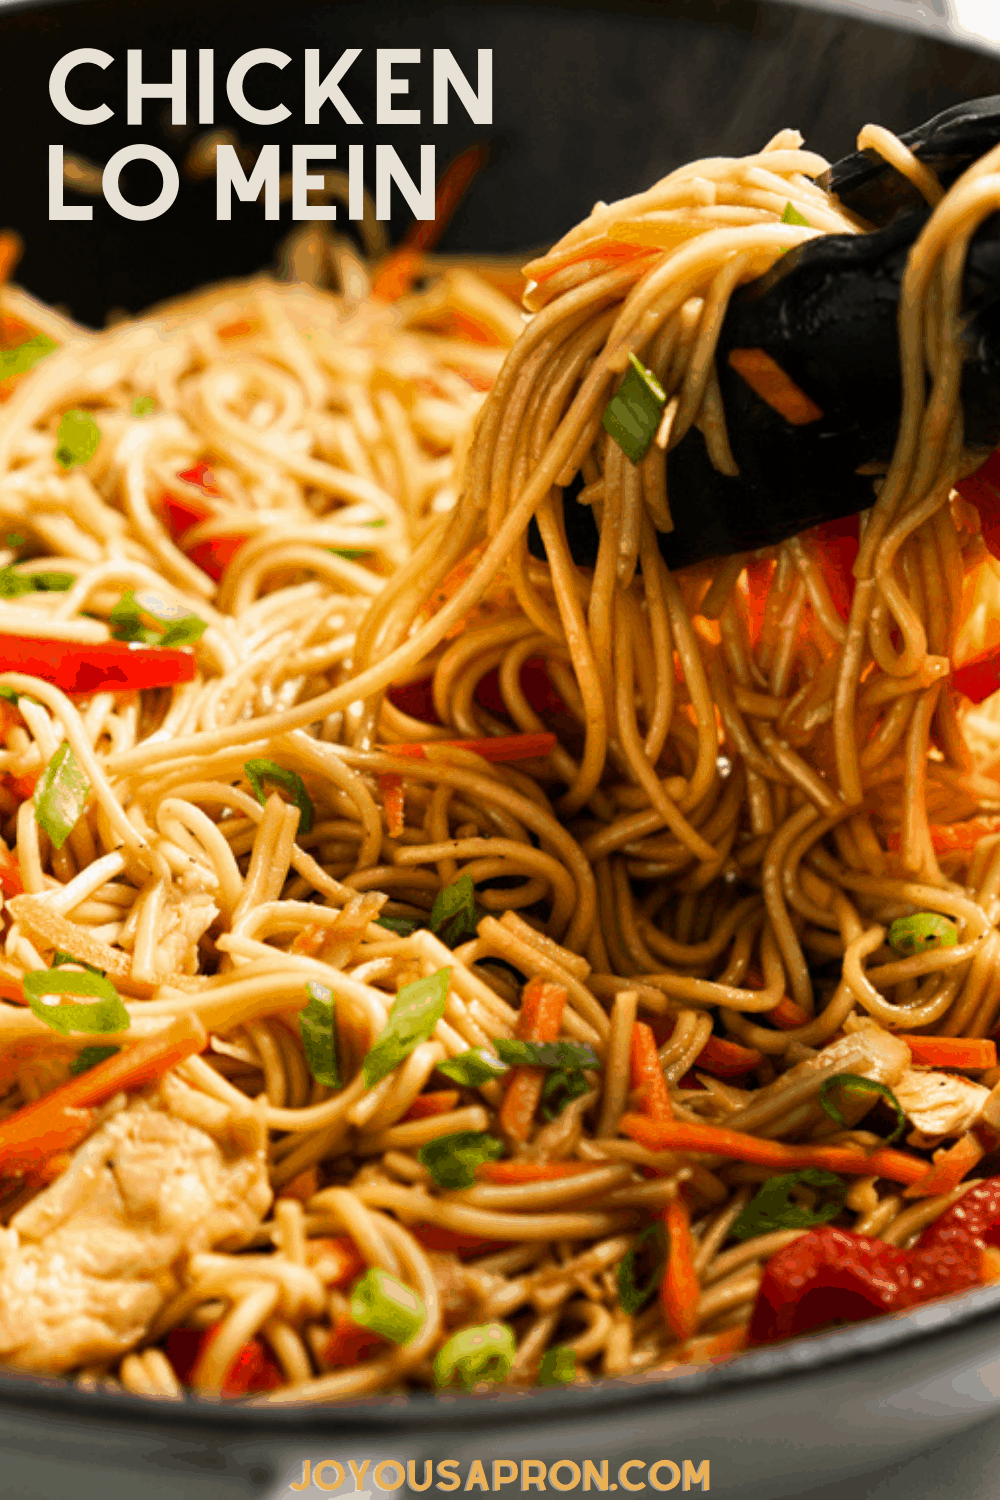 Chicken Lo Mein - easy and delicious Chinese noodle dish! An easy Asian dinner under 30 minutes. Delicious chewy egg noodles tossed in a flavorful savory soy based sauce, combined with crunchy veggies and chicken. Save well as leftovers and great for meal prep. via @joyousapron